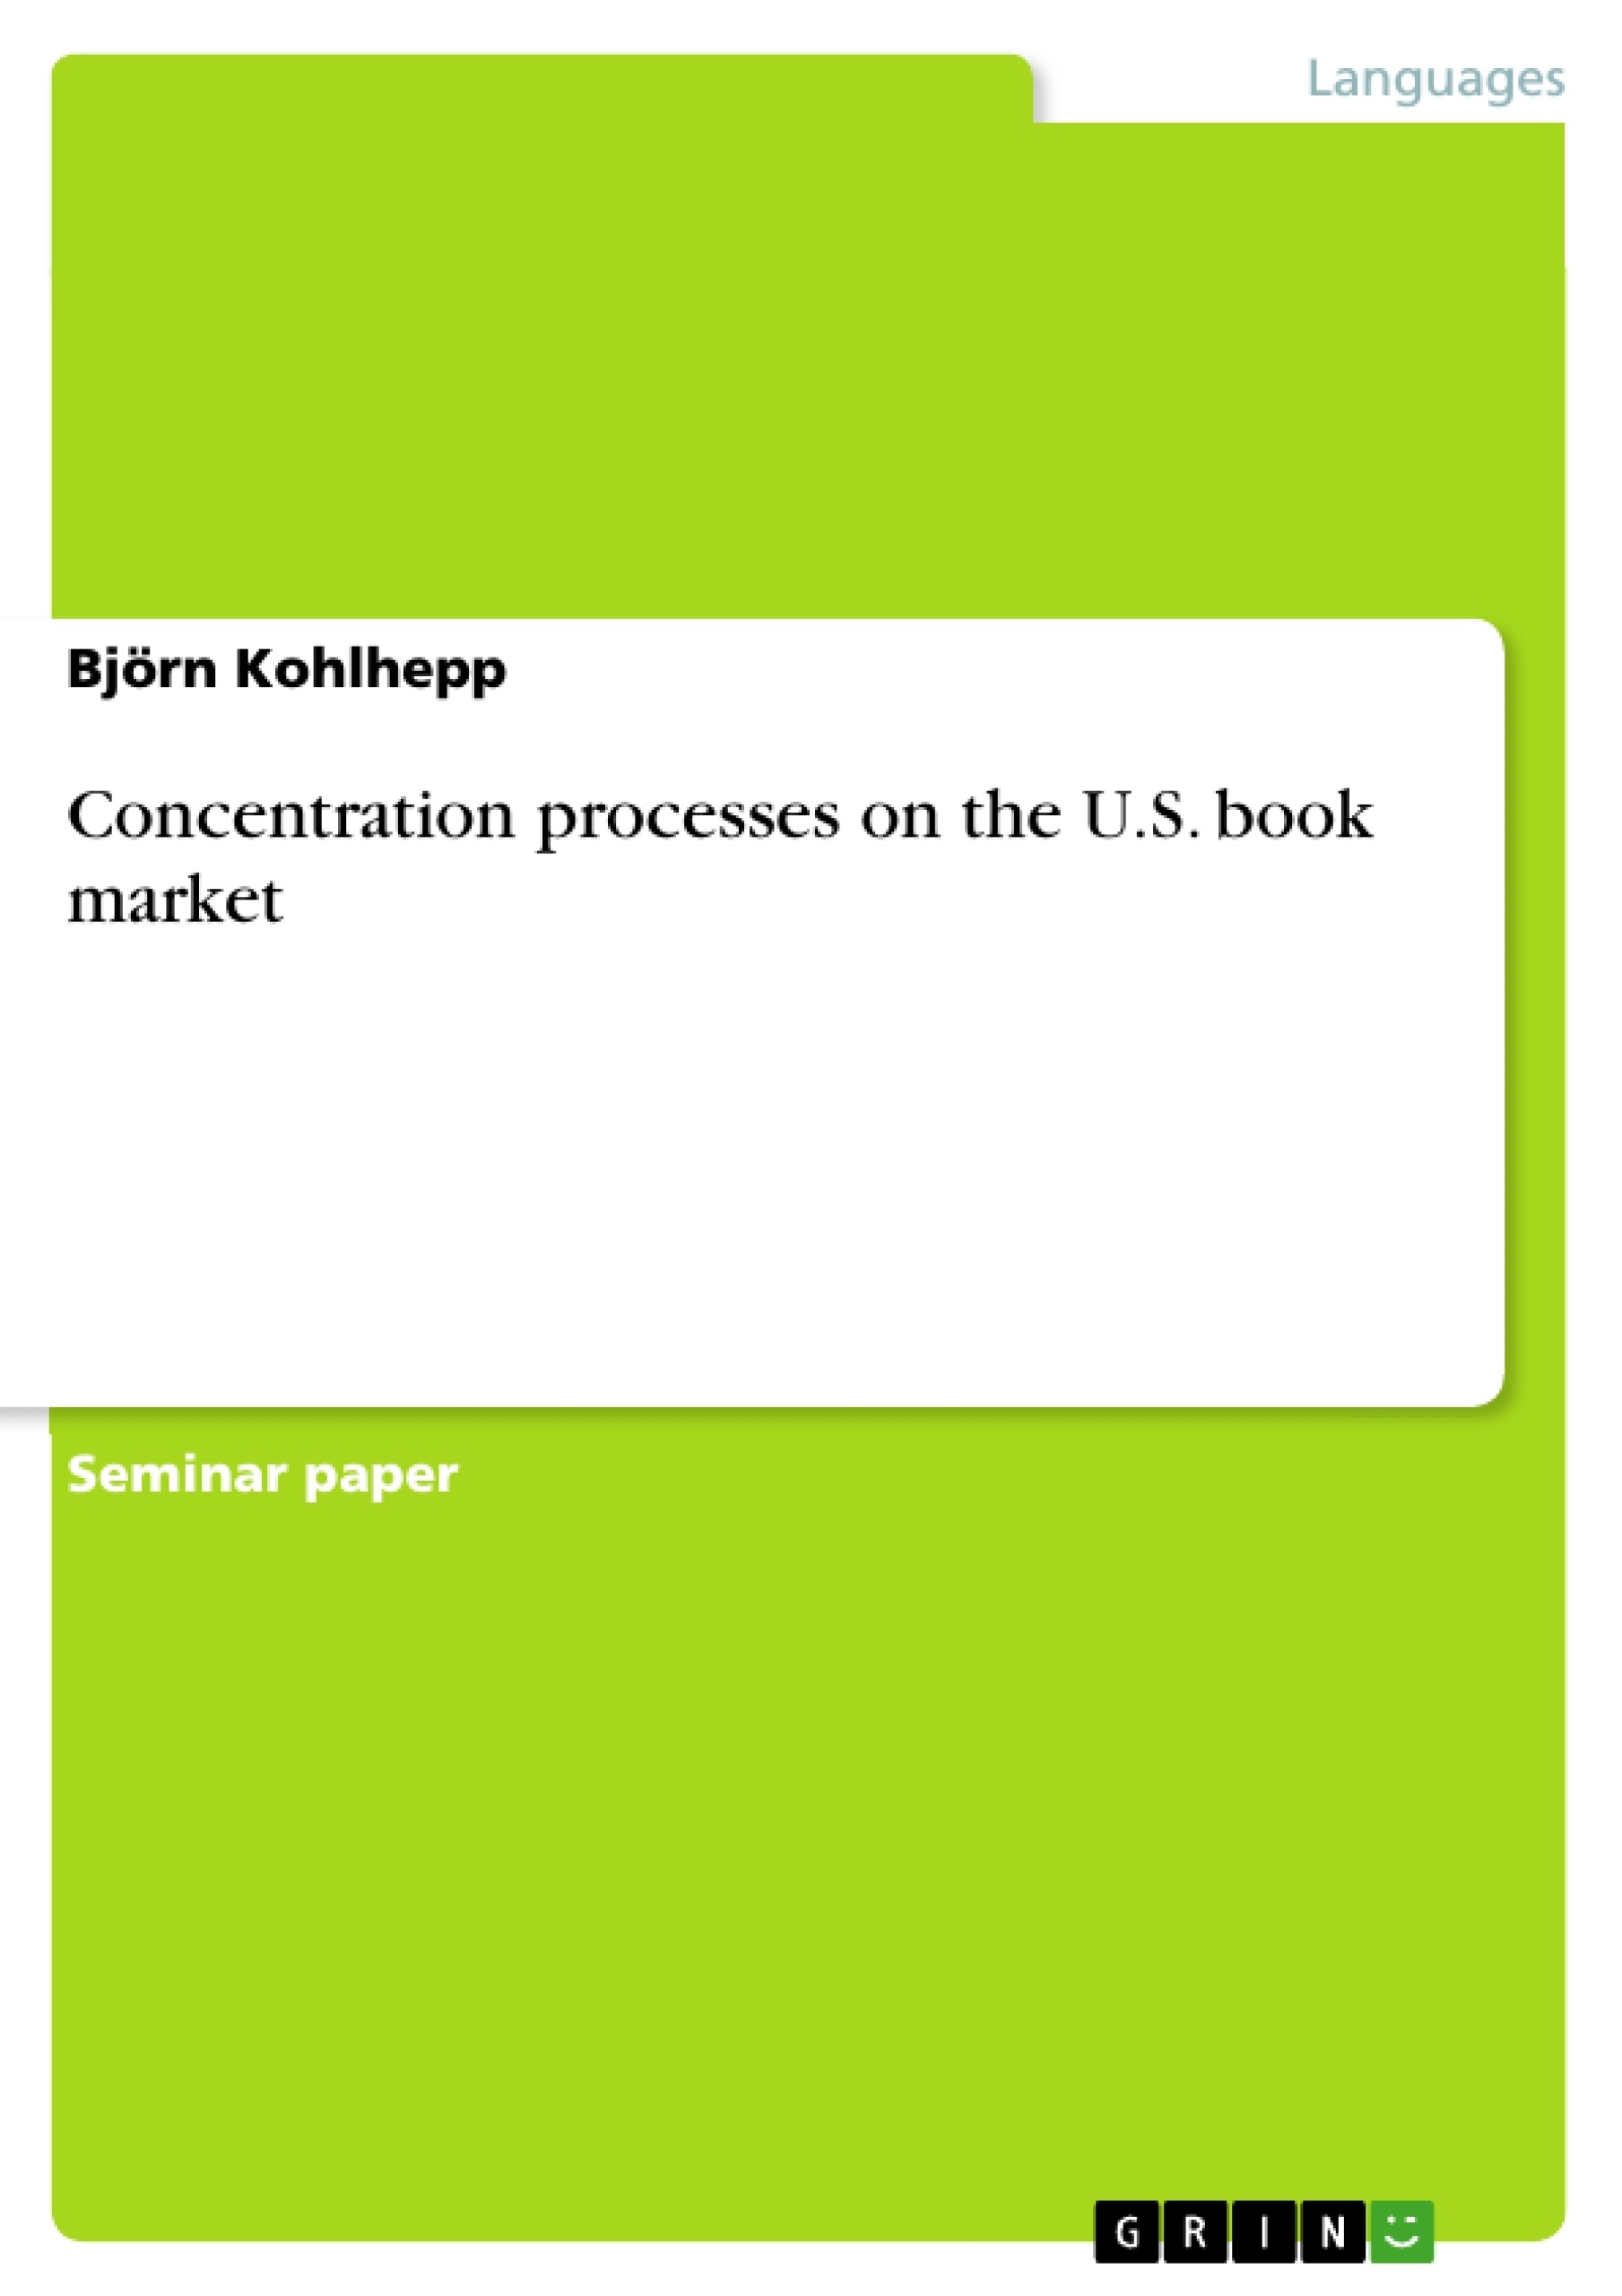 Título: Concentration processes on the U.S. book market